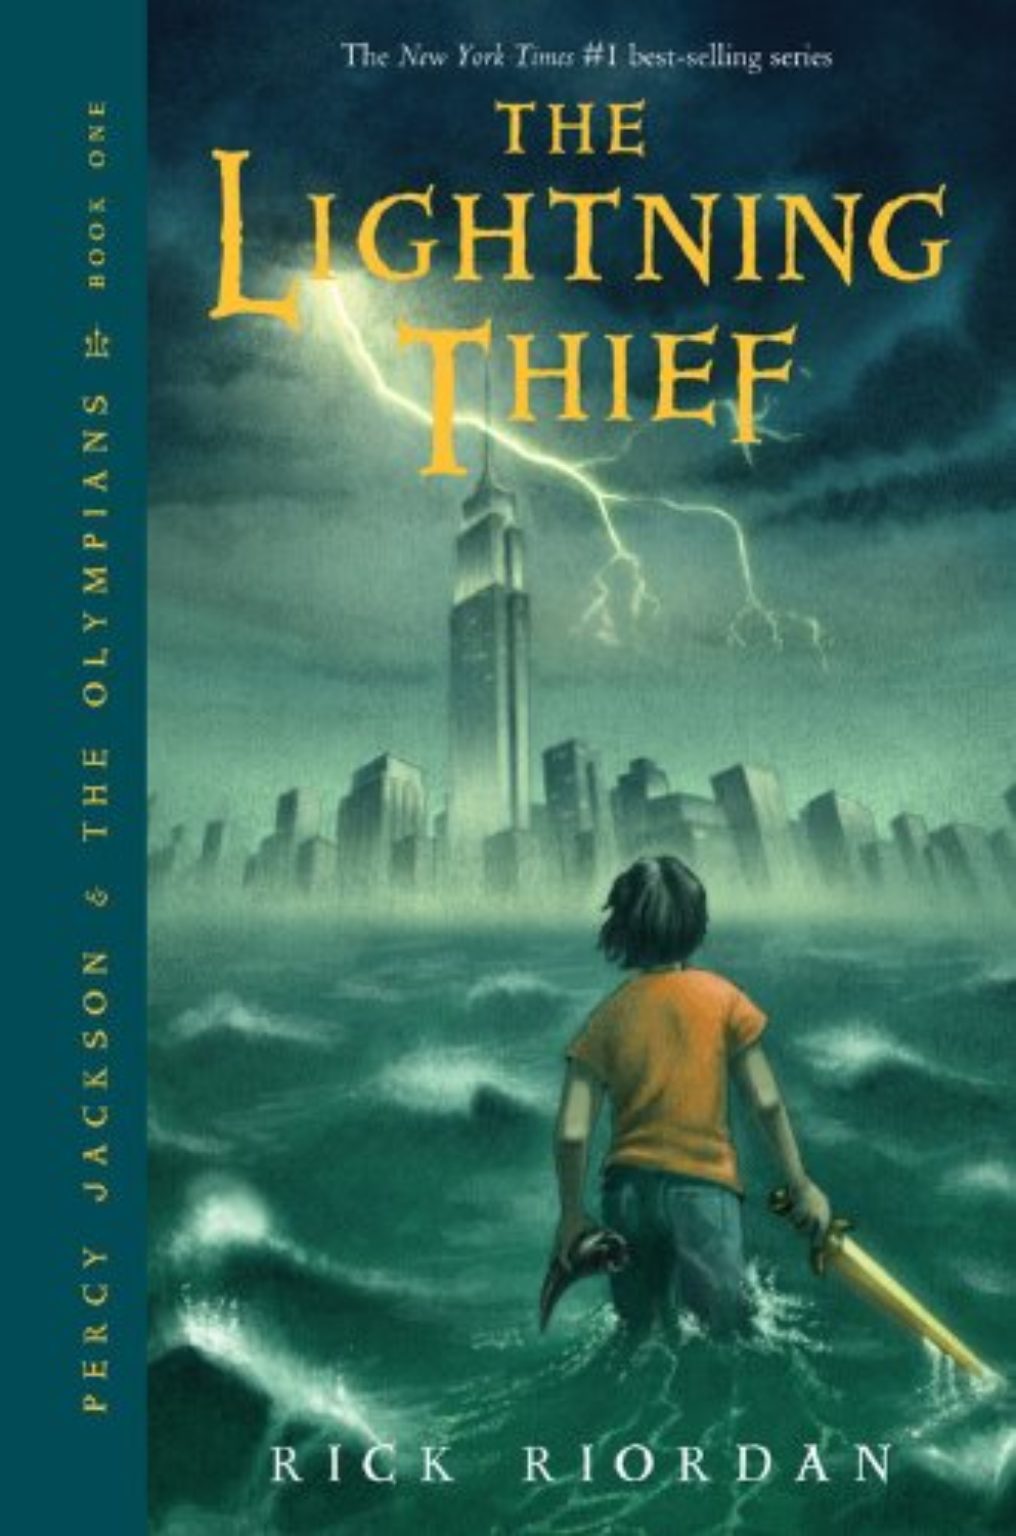 movie review of percy jackson and the lightning thief